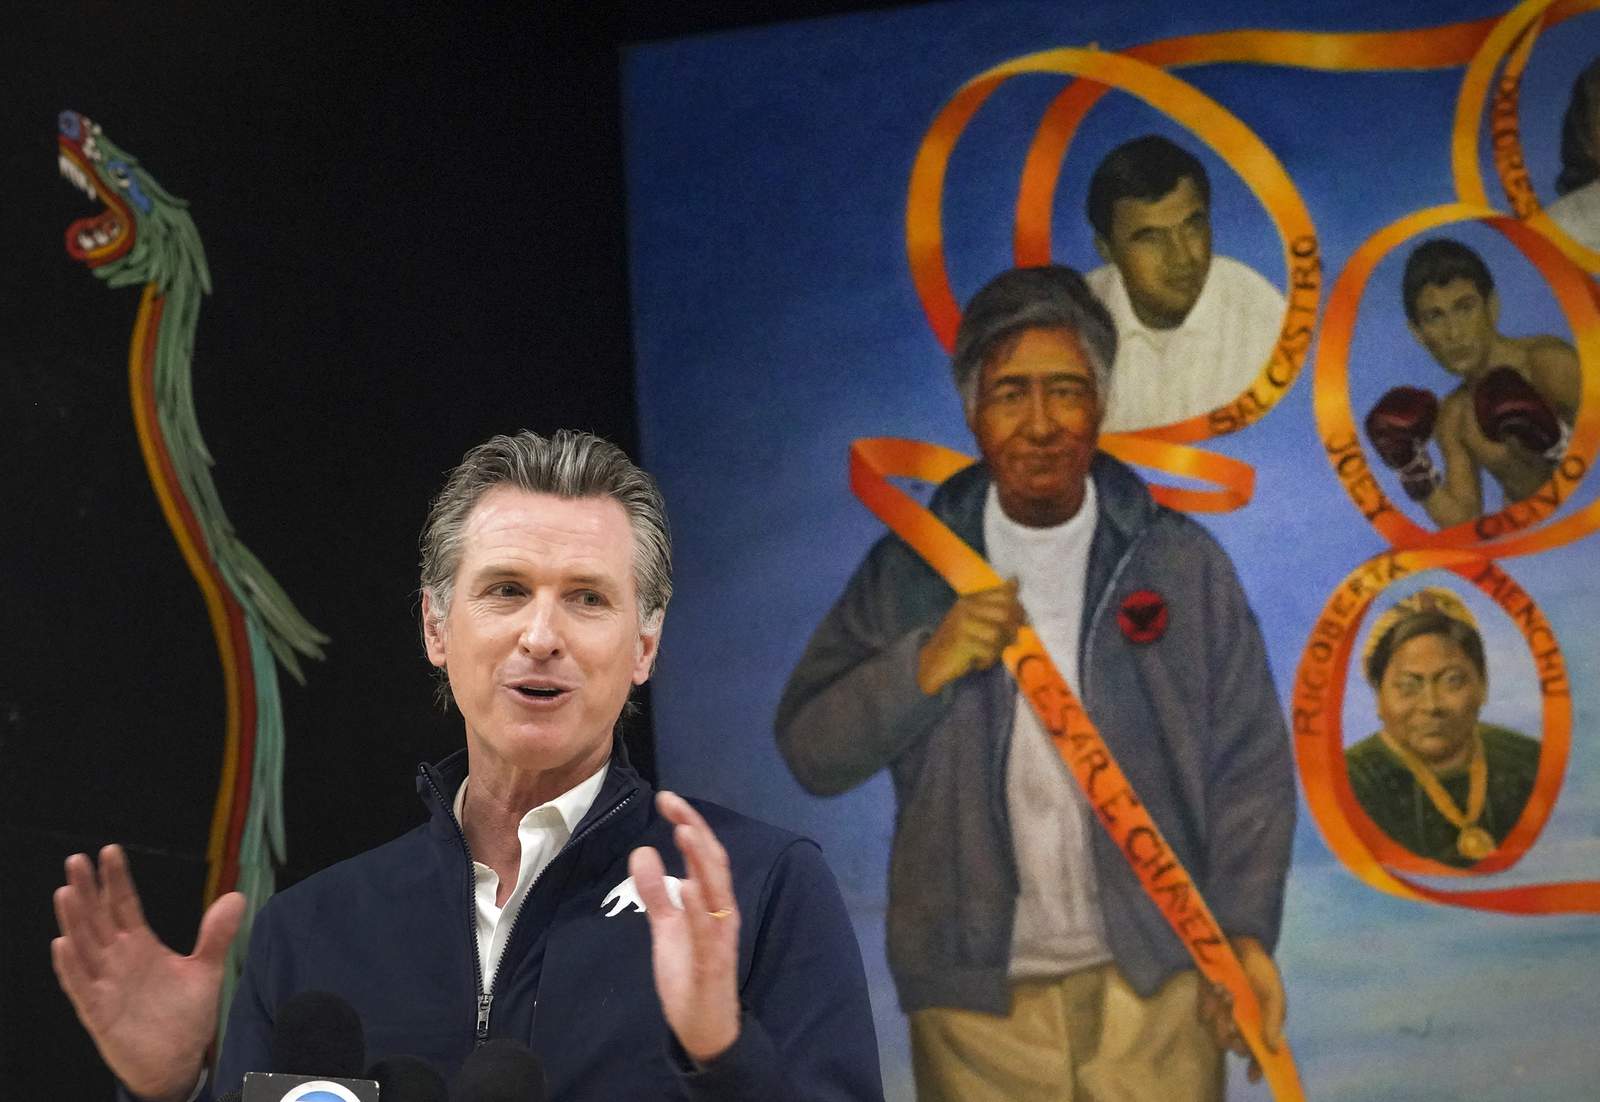 Newsom will appoint Black woman if Feinstein retires early